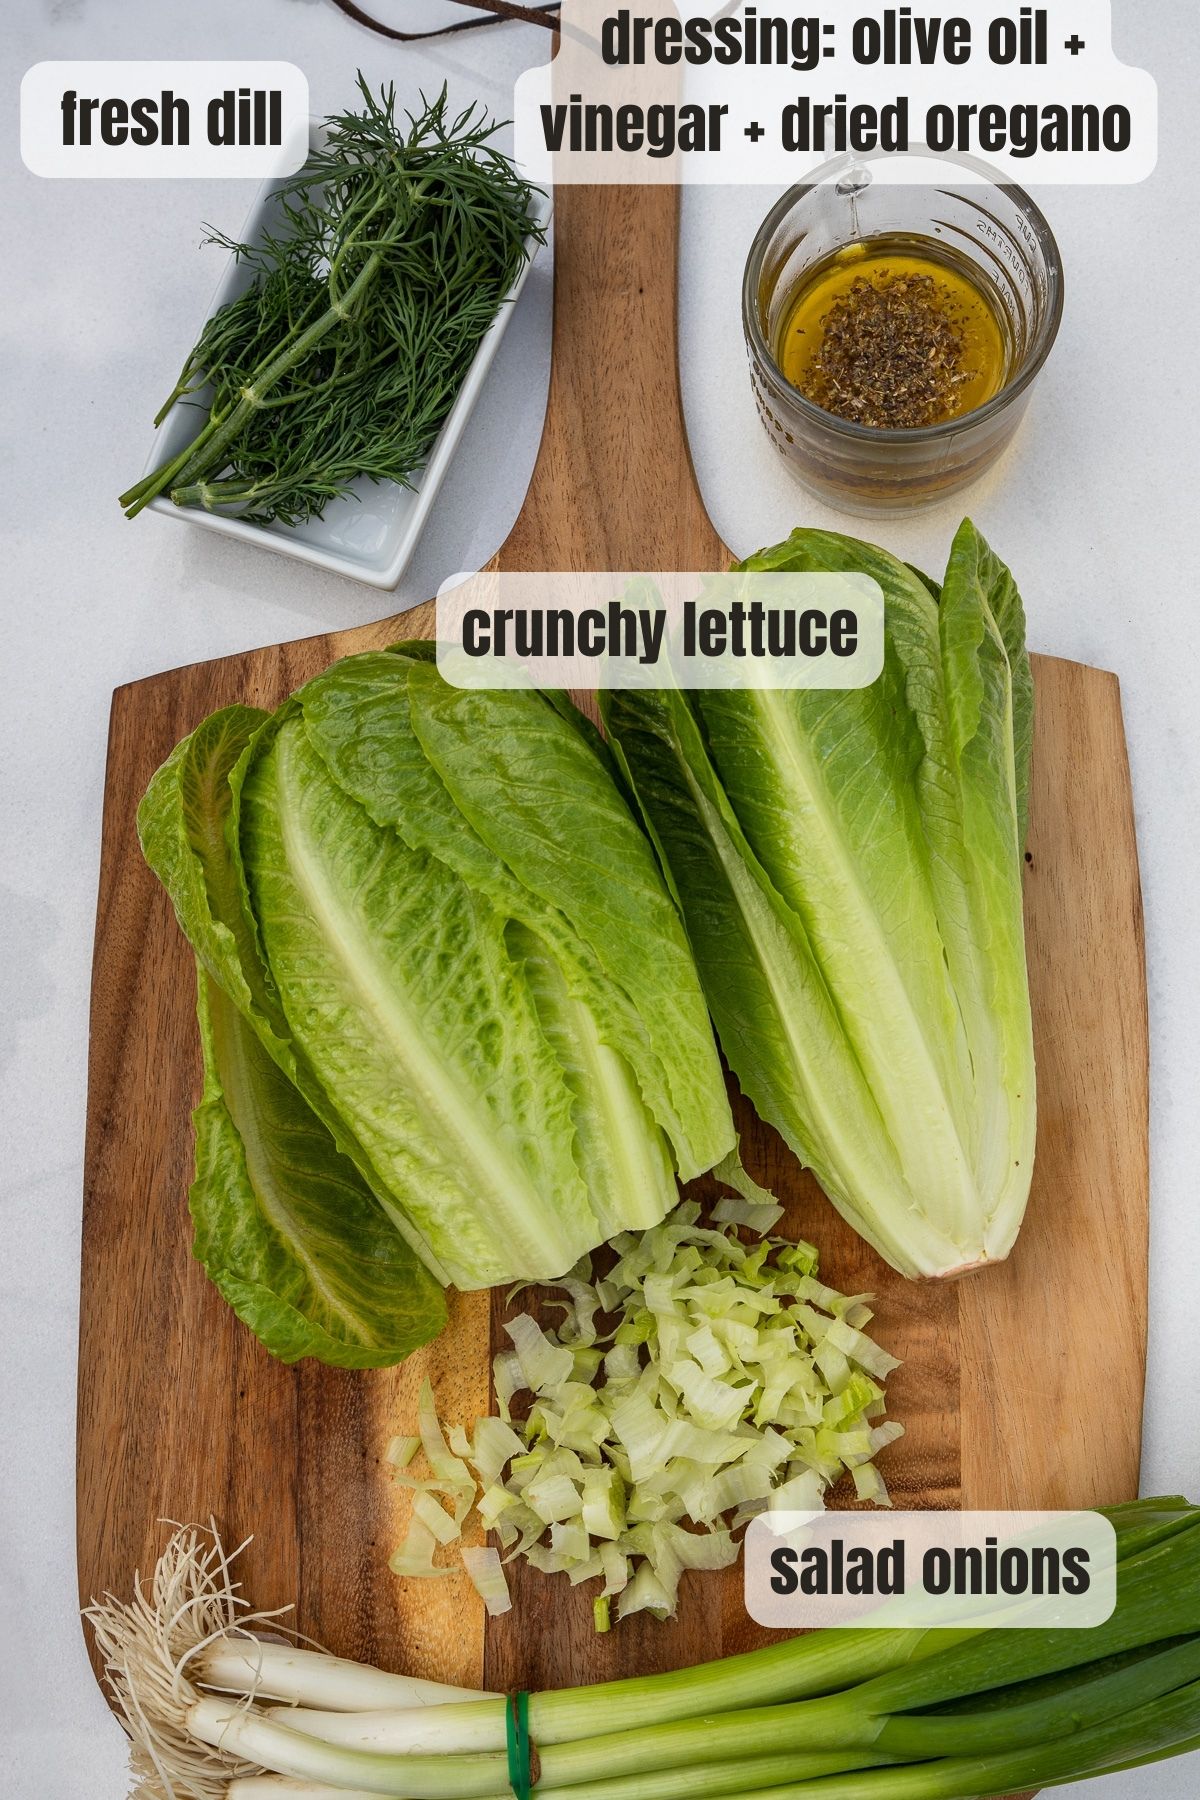 Overhead view of all the ingredients needed to make a Greek lettuce salad including shredded lettuce, fresh dill, salad onions, olive oil, vinegar and dried oregano.